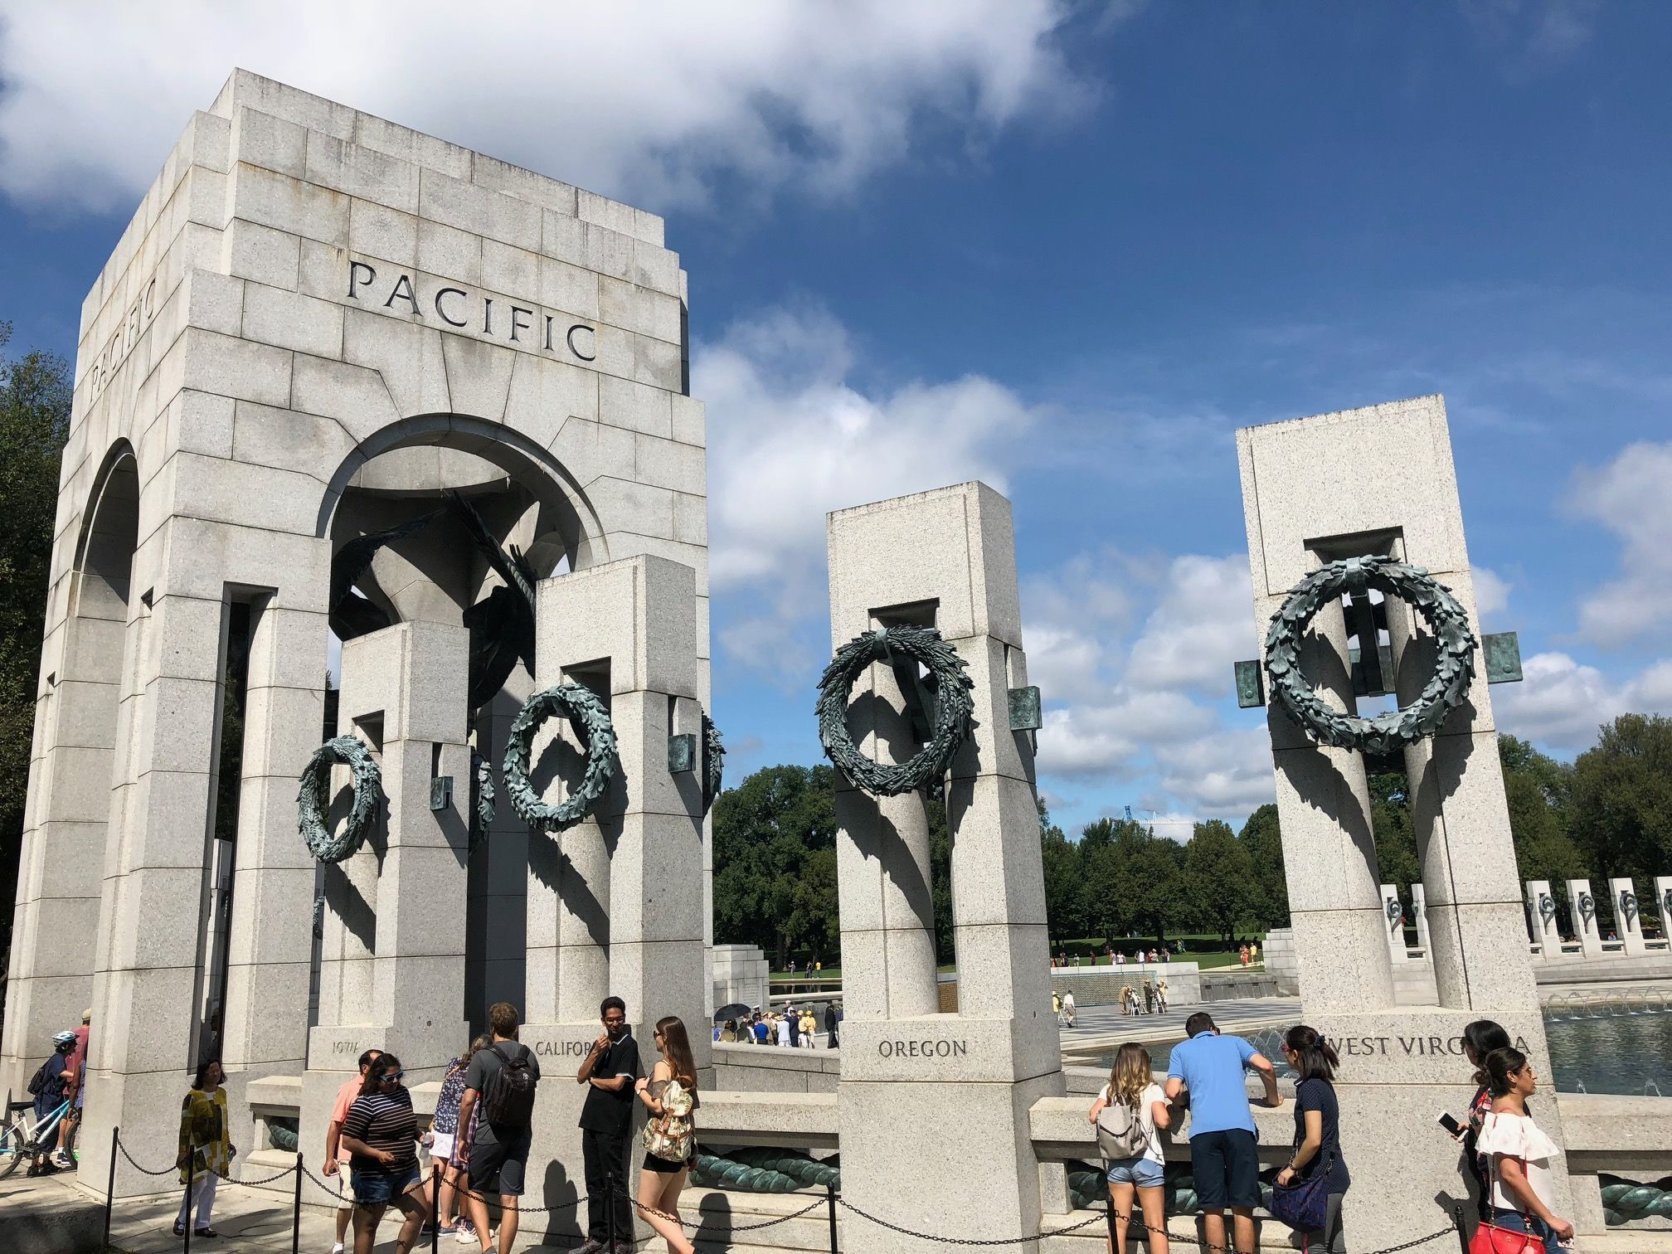 The anniversary of the day Japan surrendered to the U.S., also known as V-J Day, is honored at the National World War II Memorial. (WTOP/Keara Dowd)